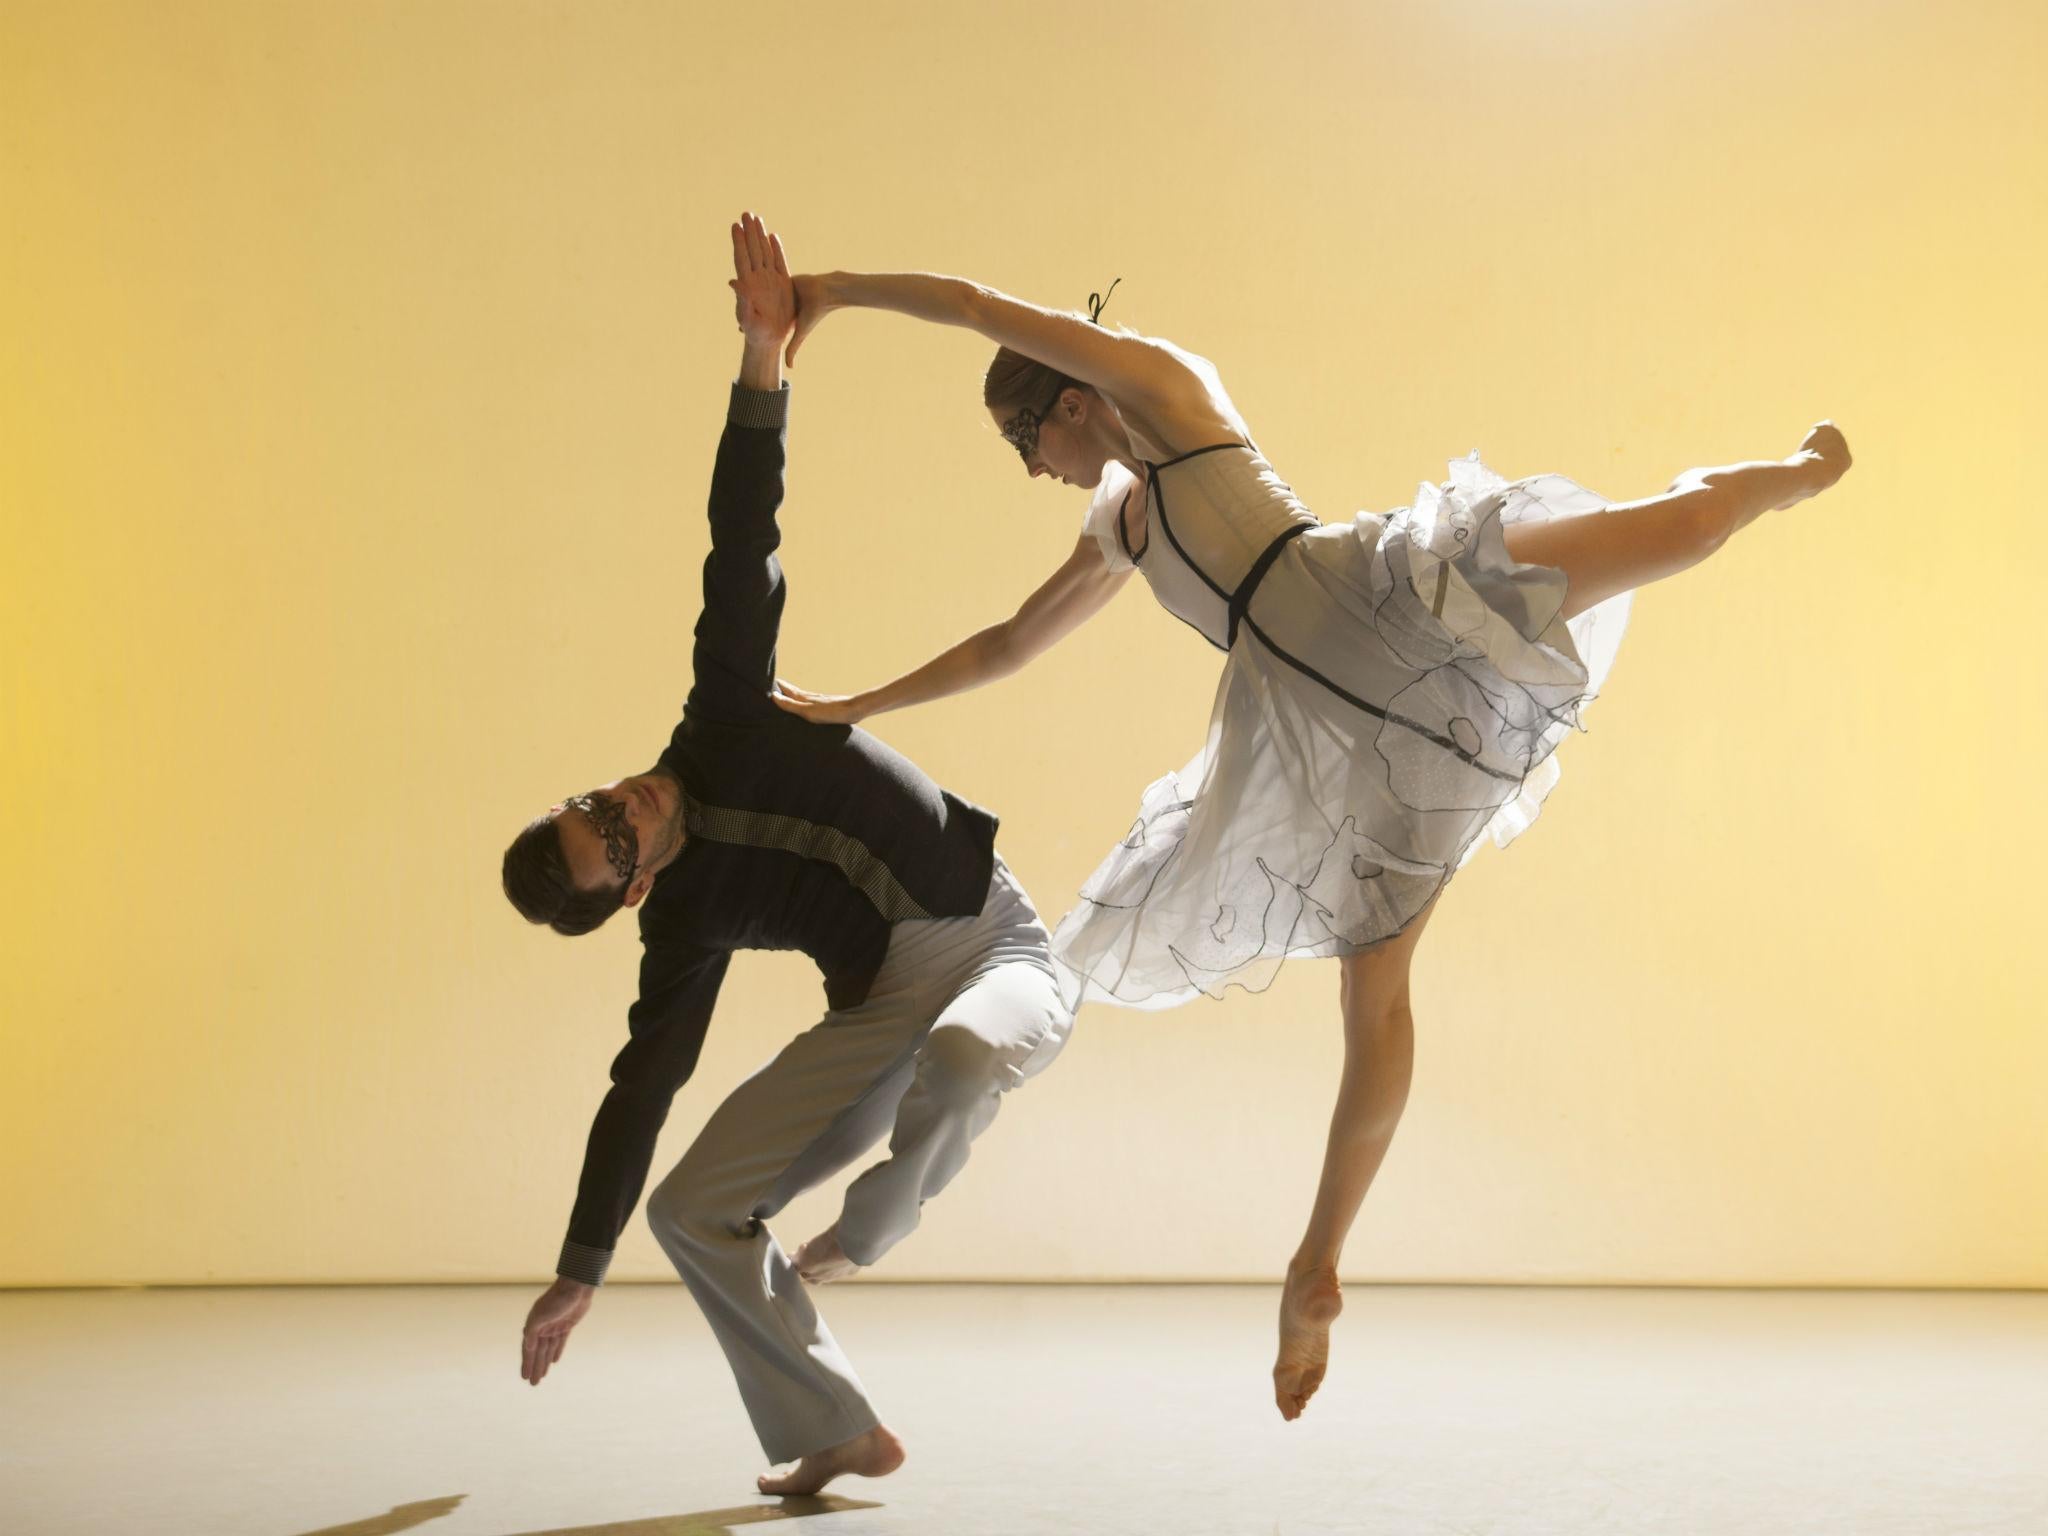 Nicholas Bodych and Elly Braund performing in ‘Carnaval’ as part of Mid Century Modern at Sadler’s Wells